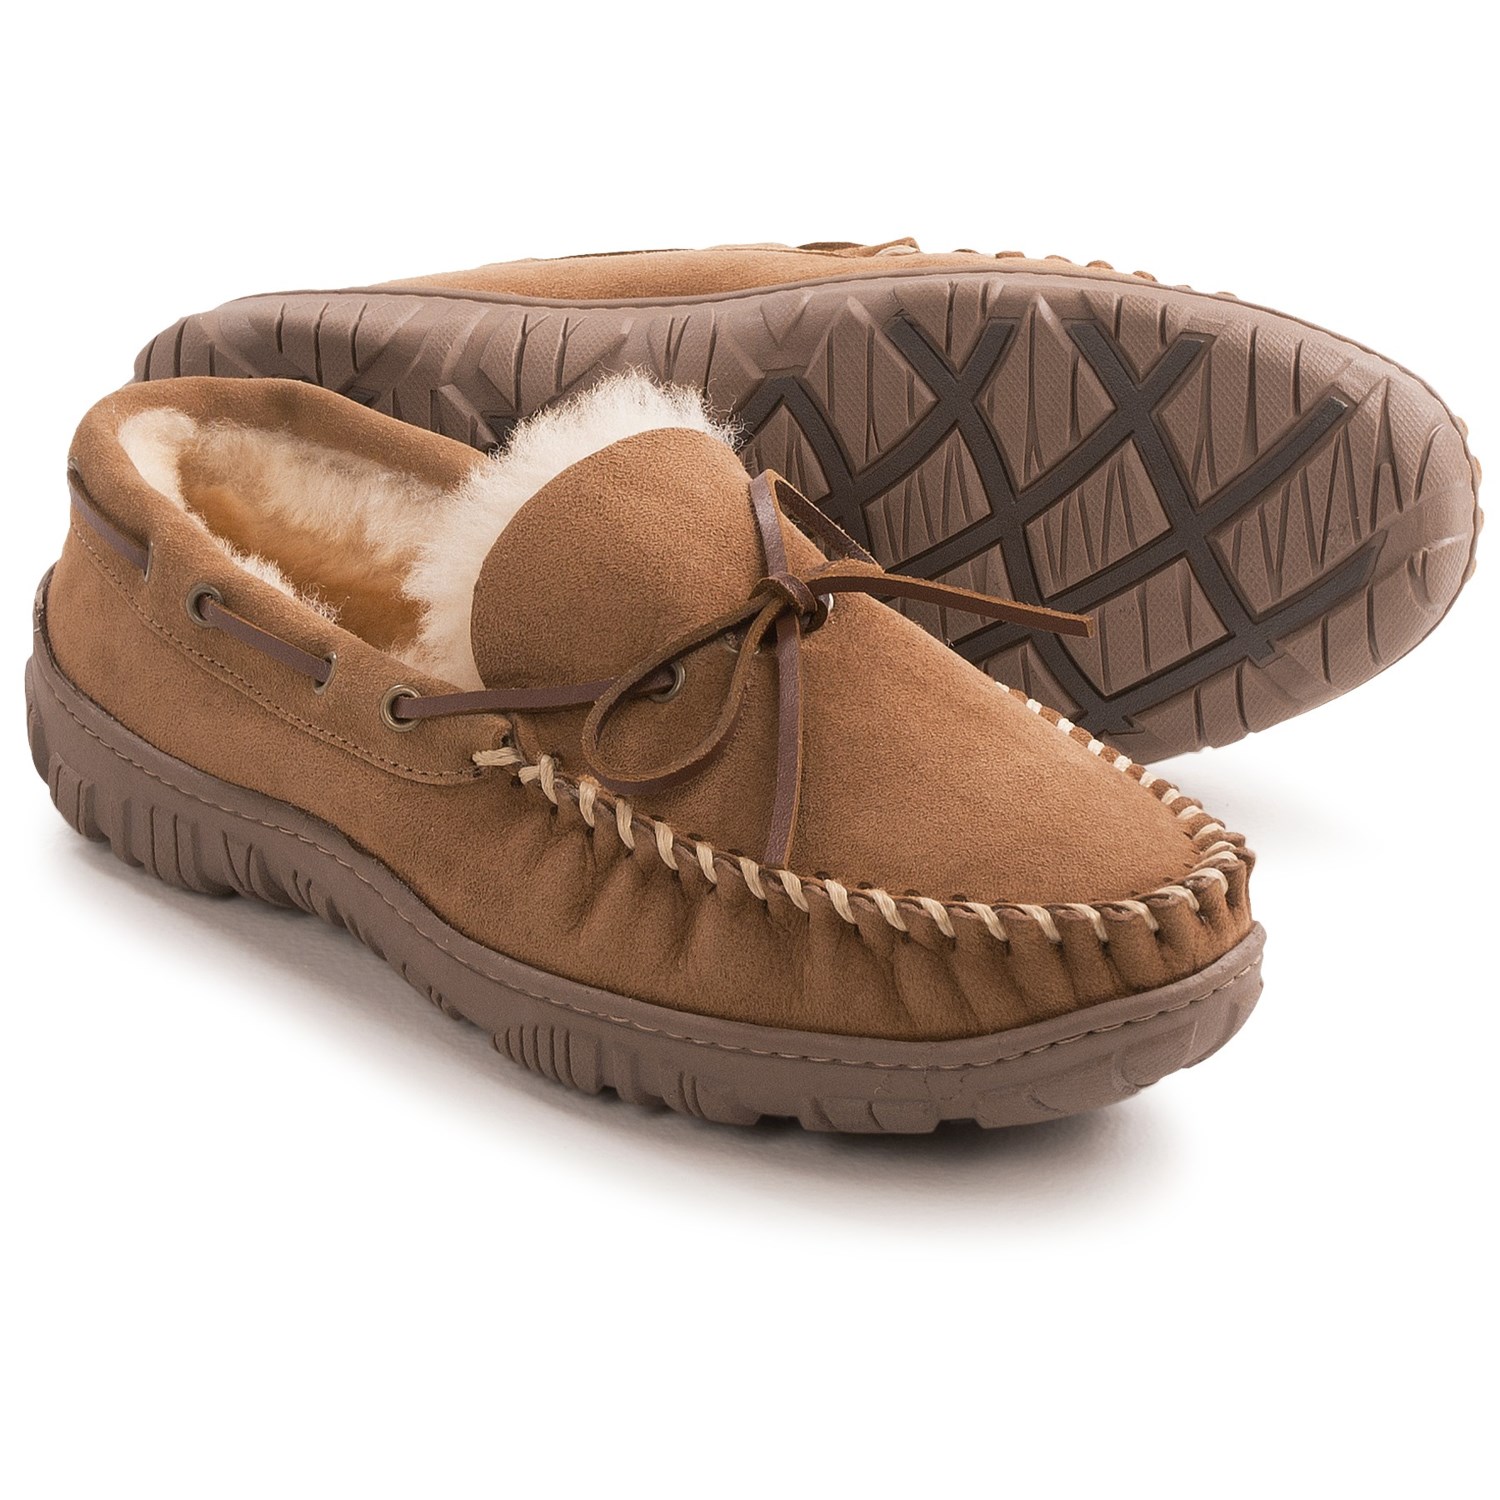 Clarks Moc Shearling Slippers (For Men) - Save 62%